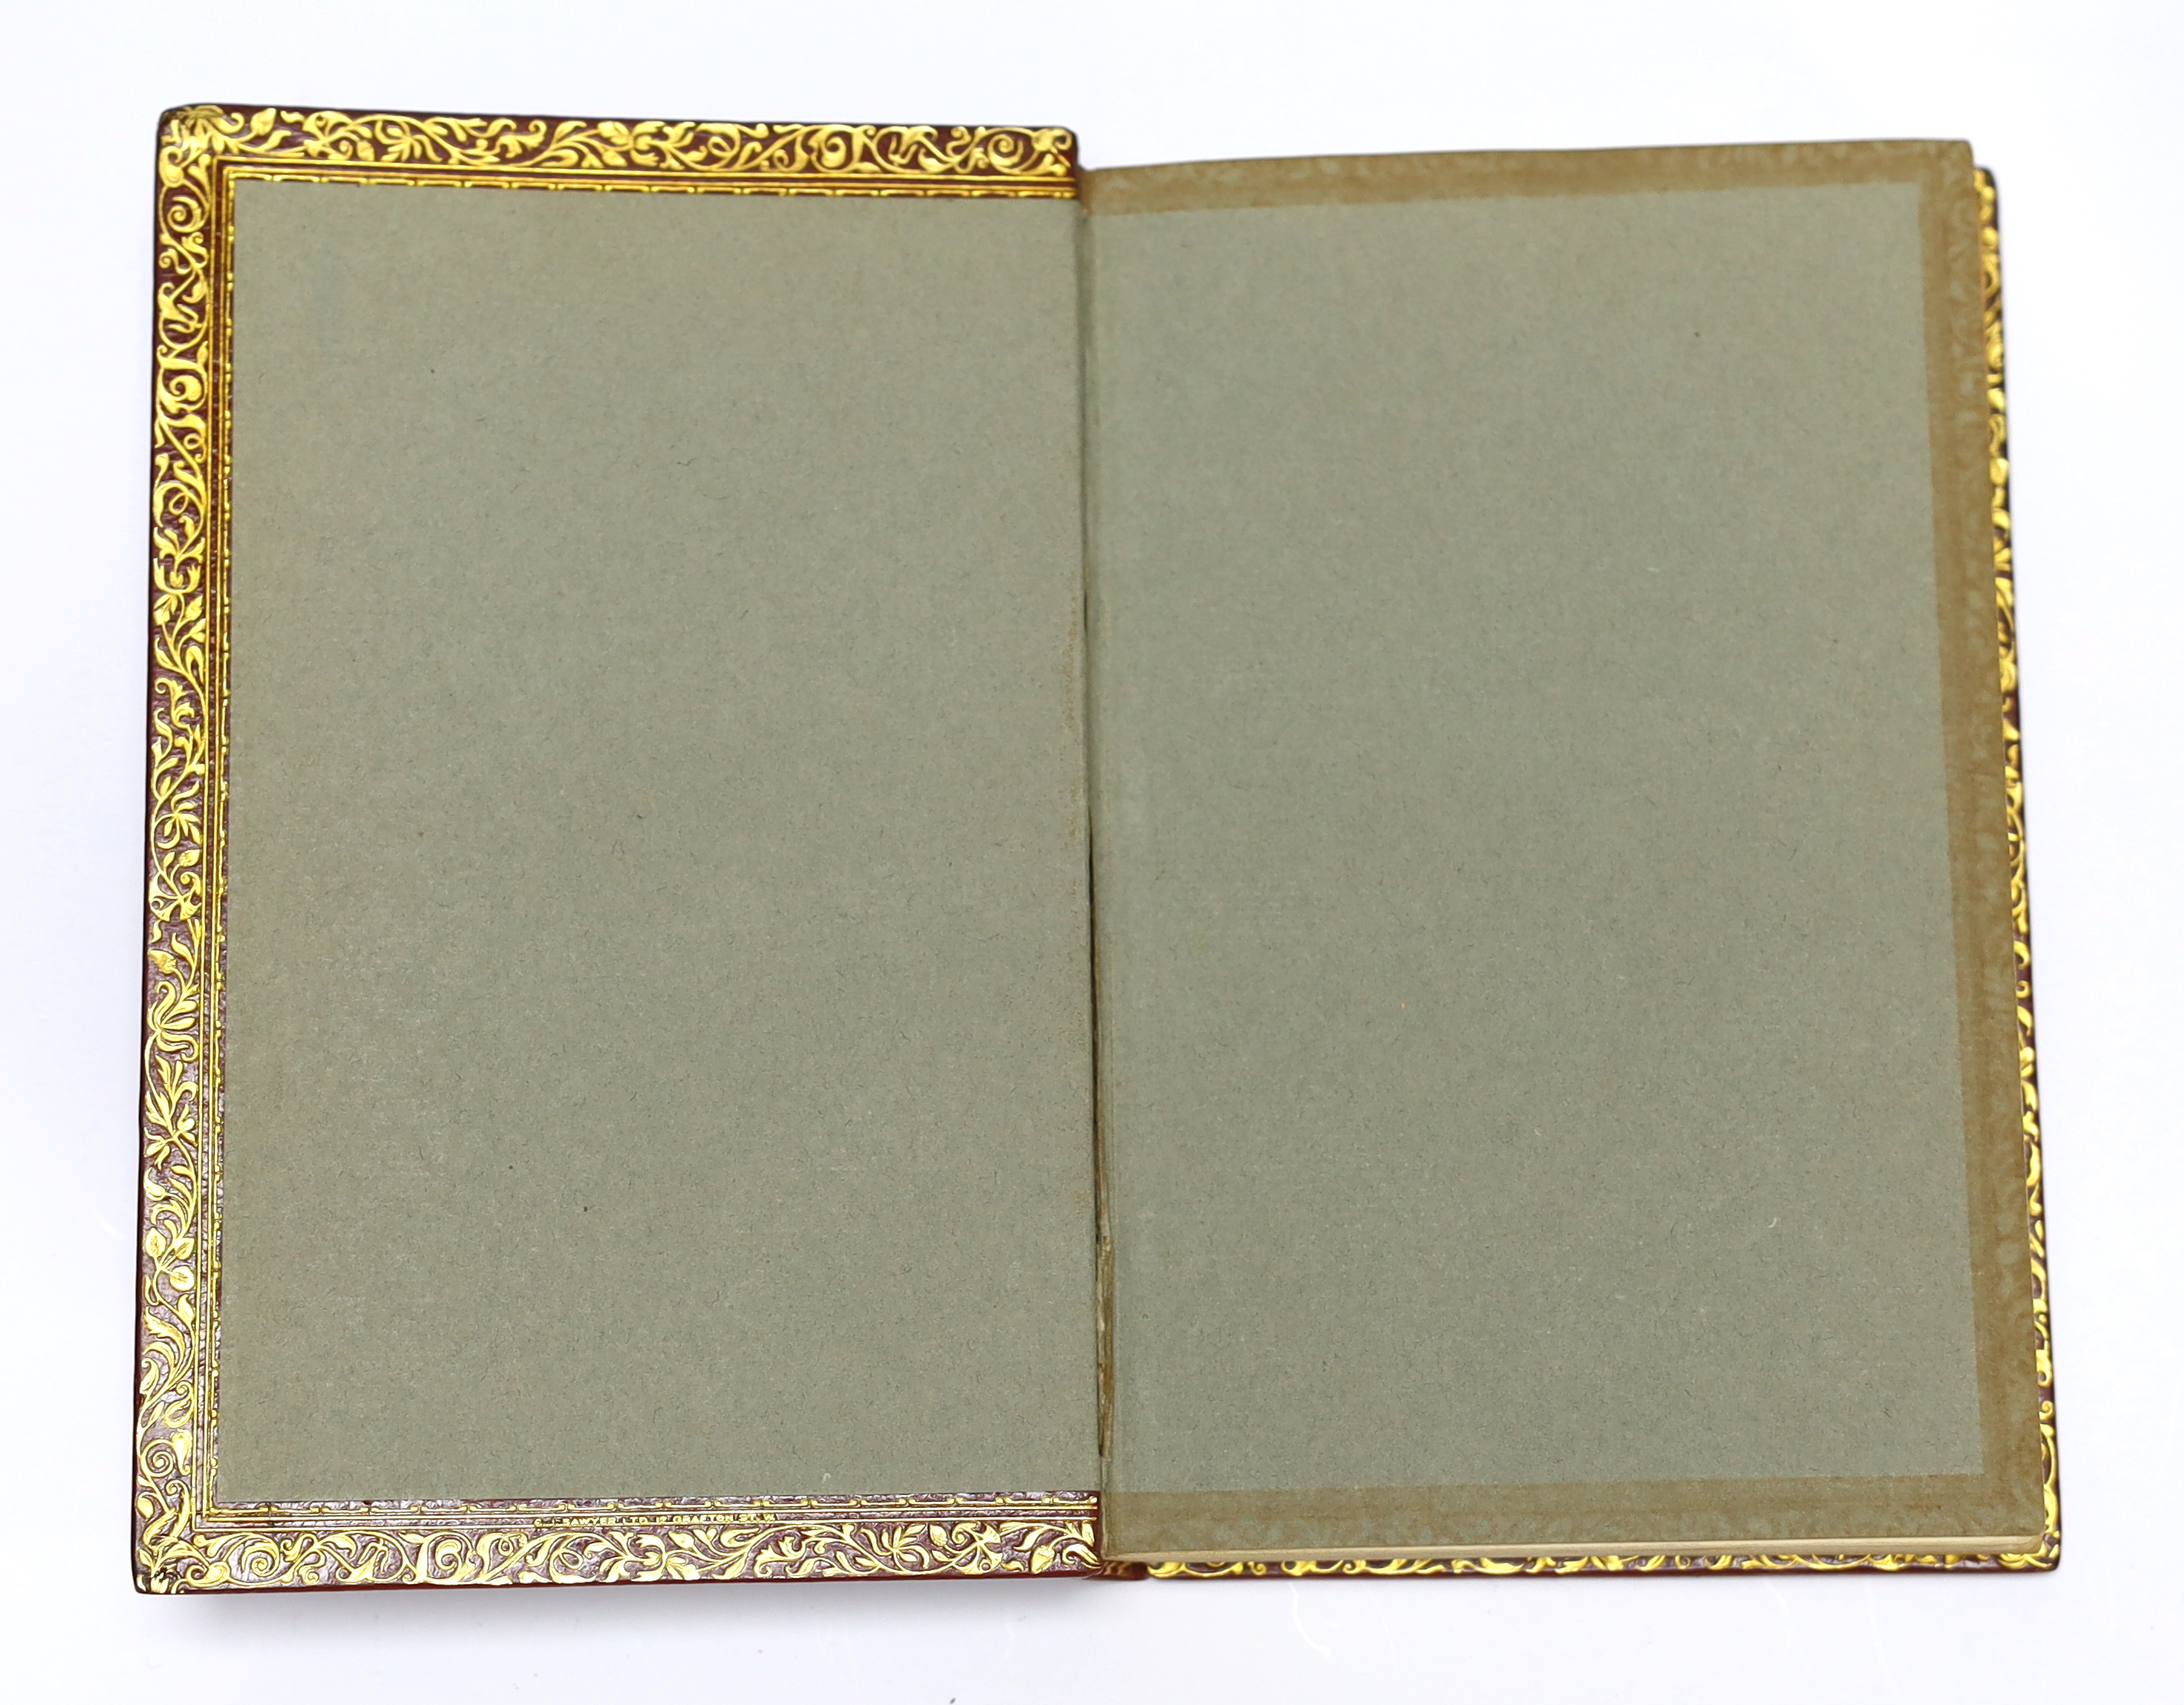 Dickens, Charles - Great Expectations, 3 vols, 1st edition in book form, 1st issue with no edition statements on title-page, crown 8vo (187 x 115mm.), in fine mid 20th century gilt-ruled red levant morocco bindings, gilt